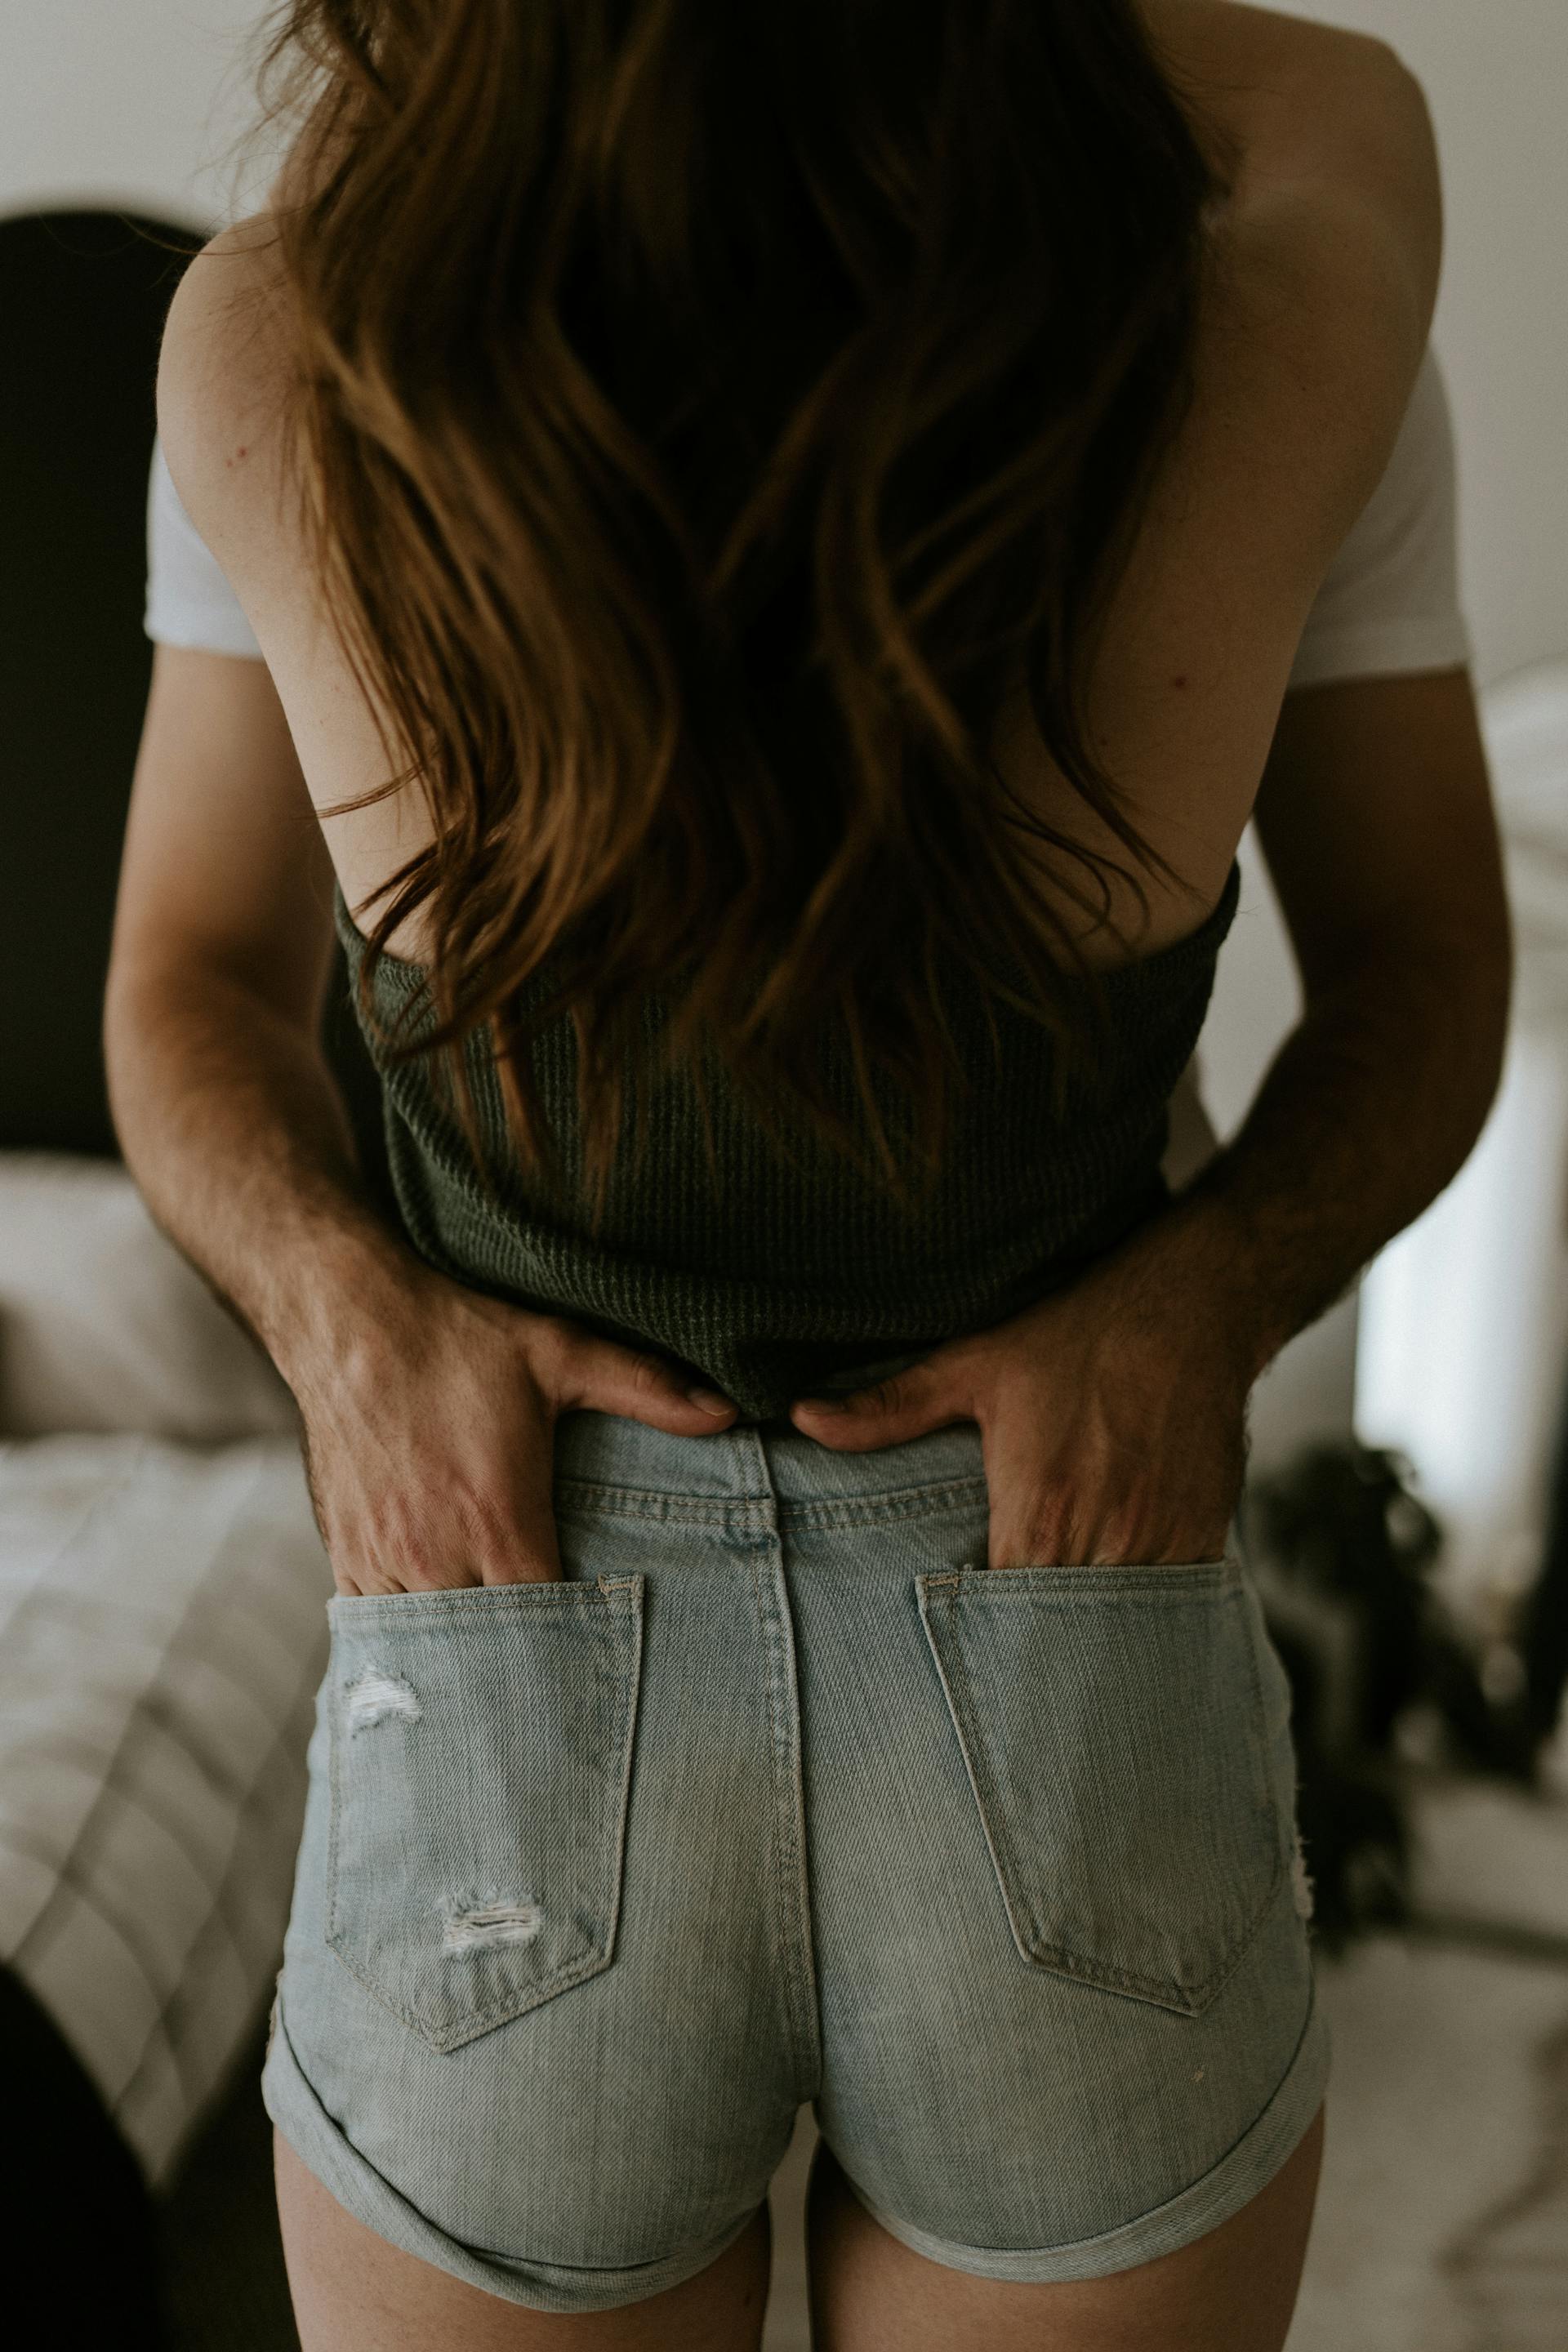 A couple embracing | Source: Pexels